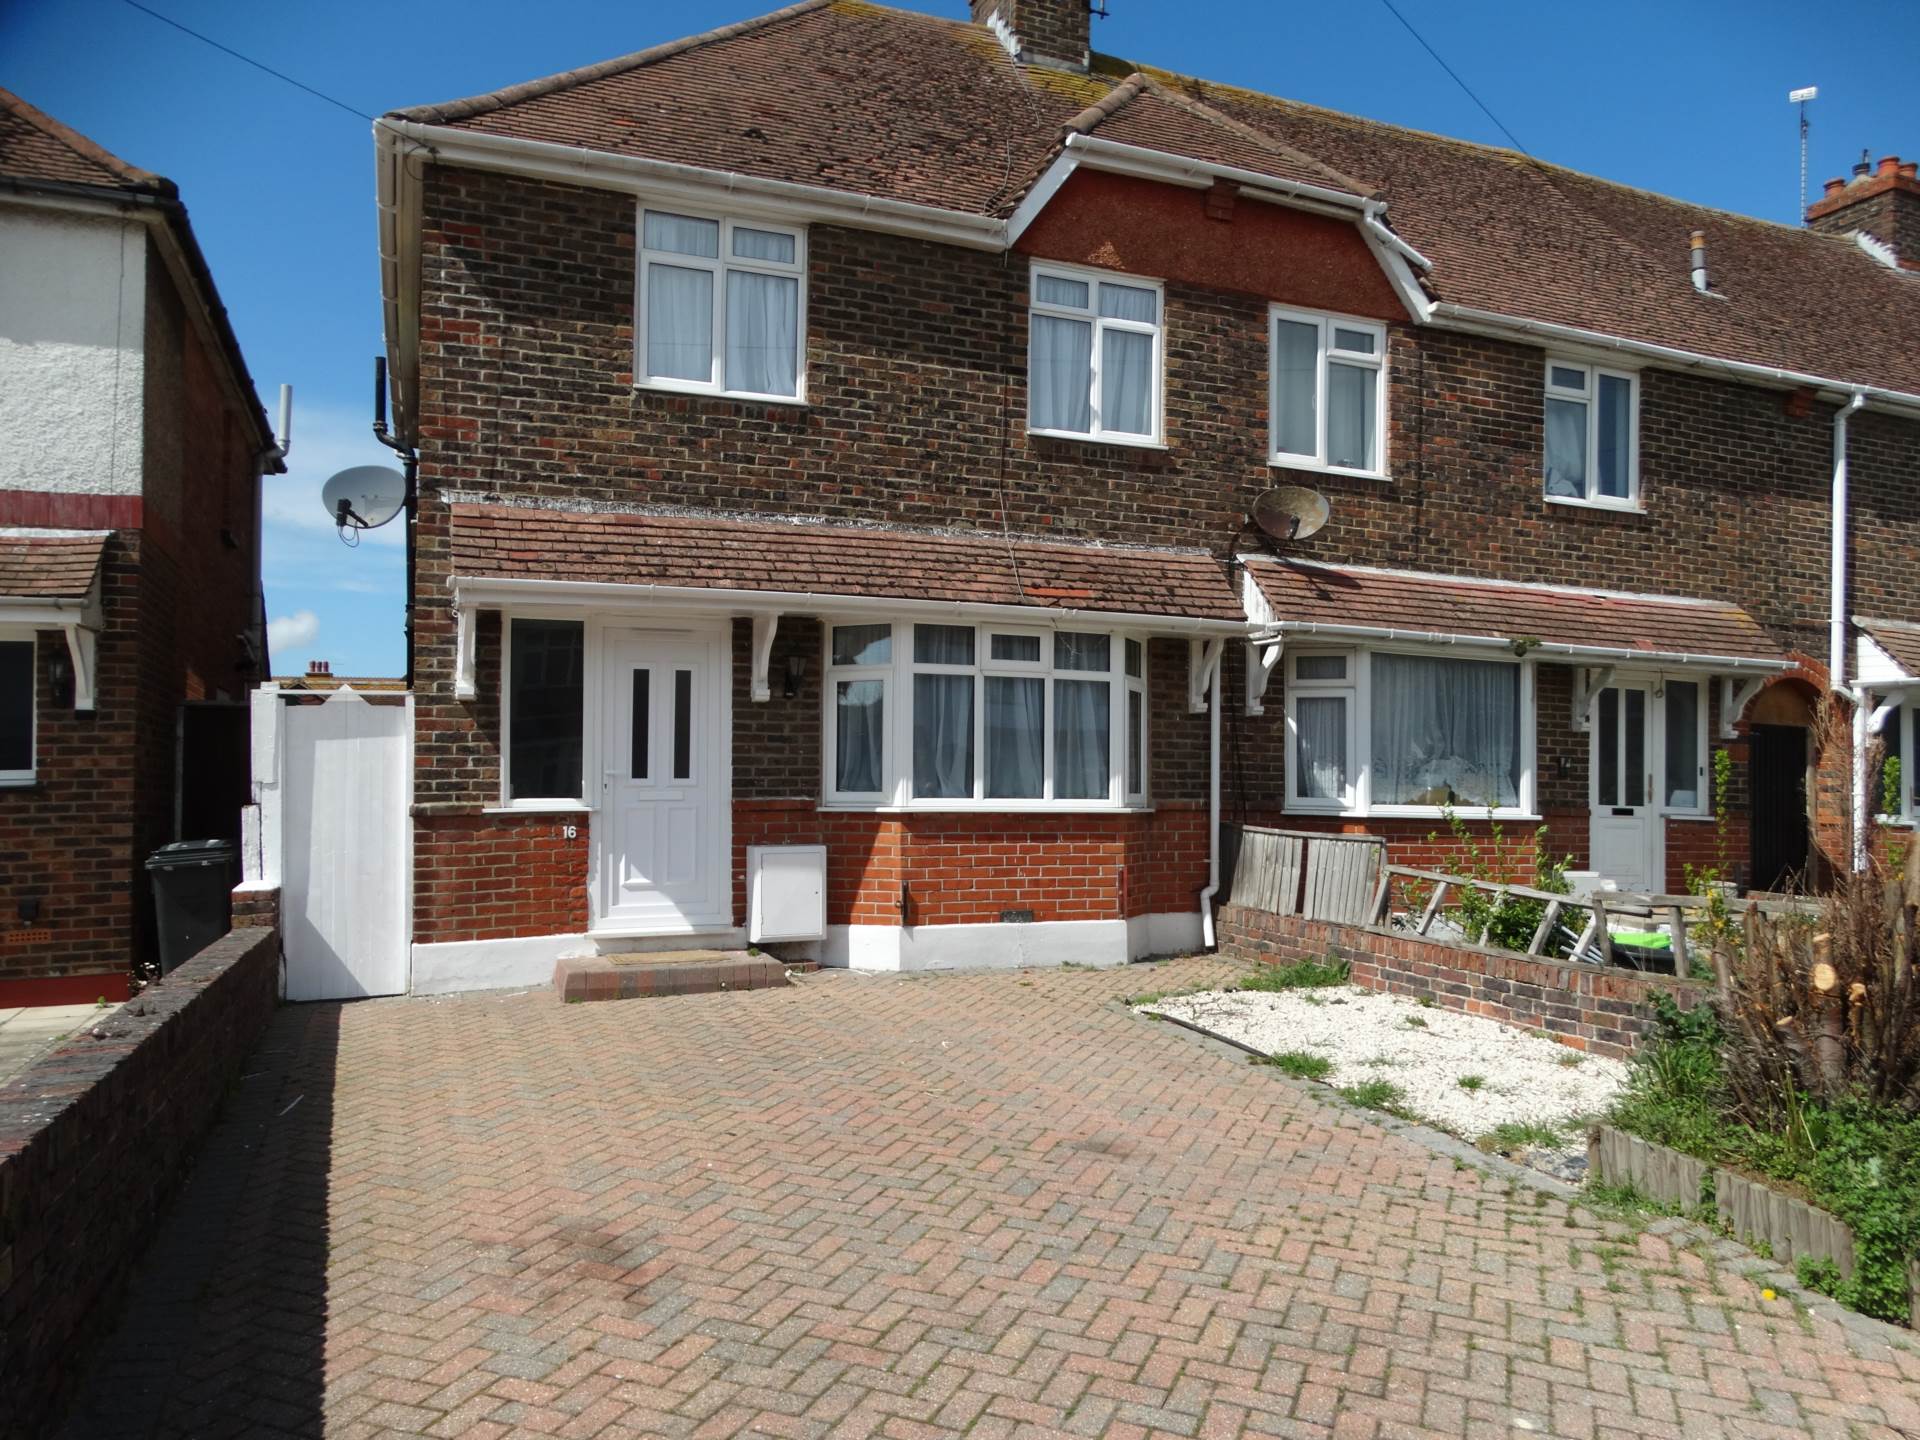 3 bed End Terraced House for rent in Eastbourne. From Cavendish and Co - Eastbourne